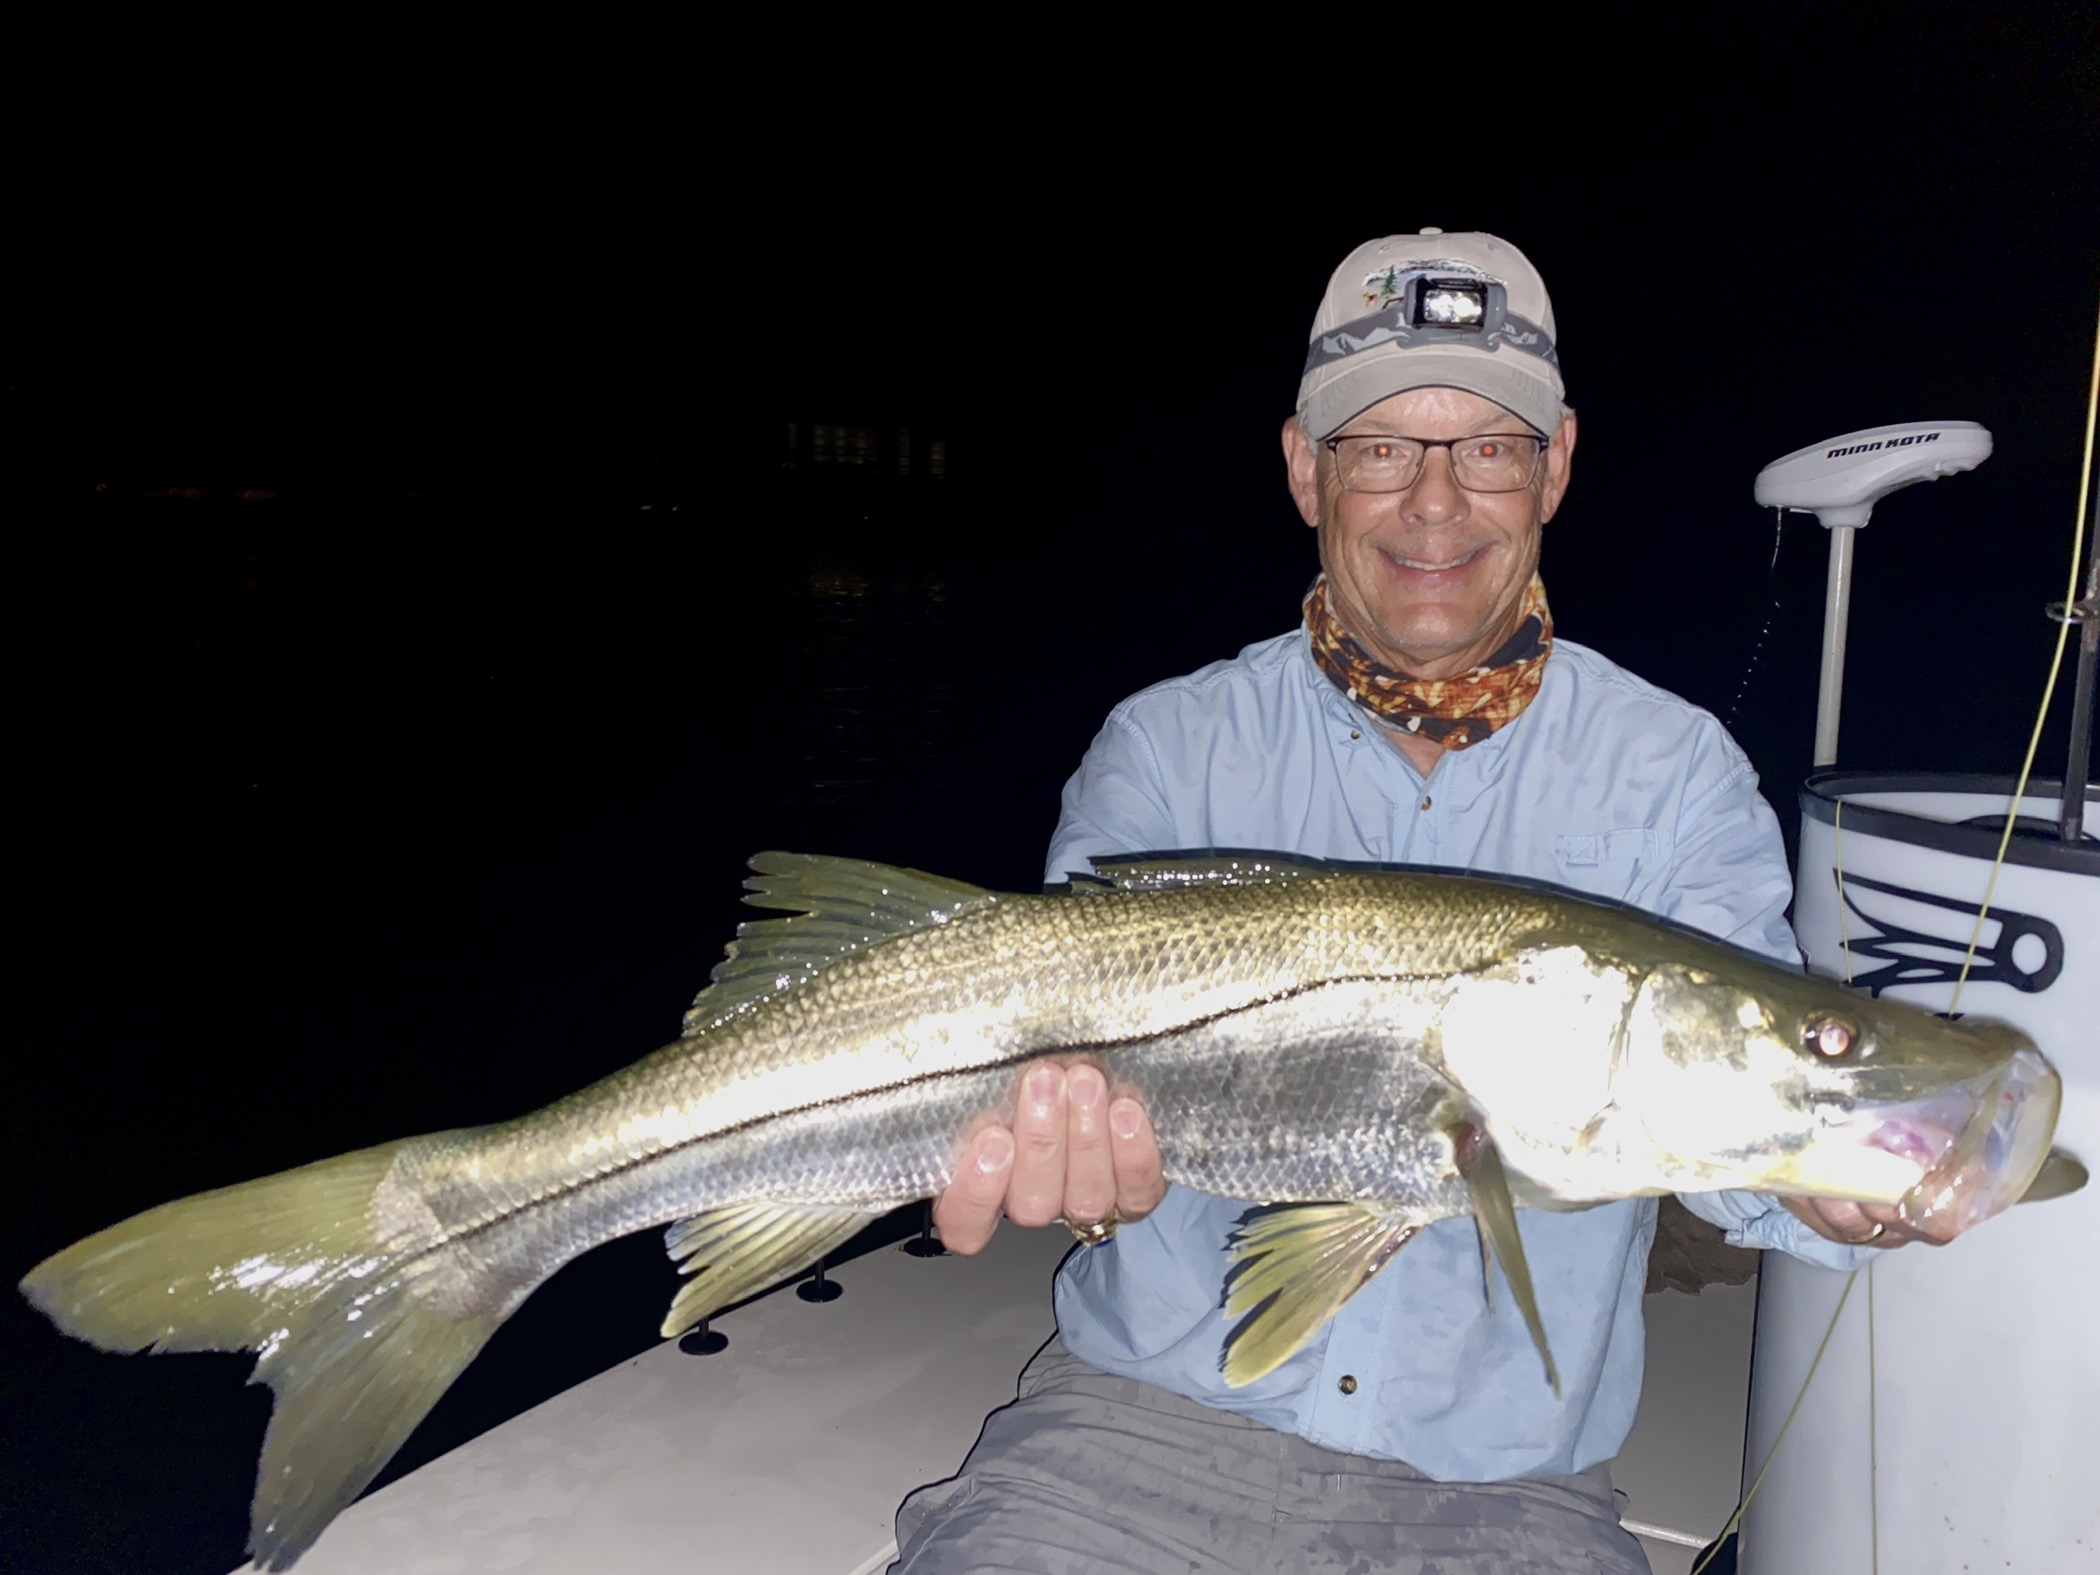 An angler smiles holding a large snook